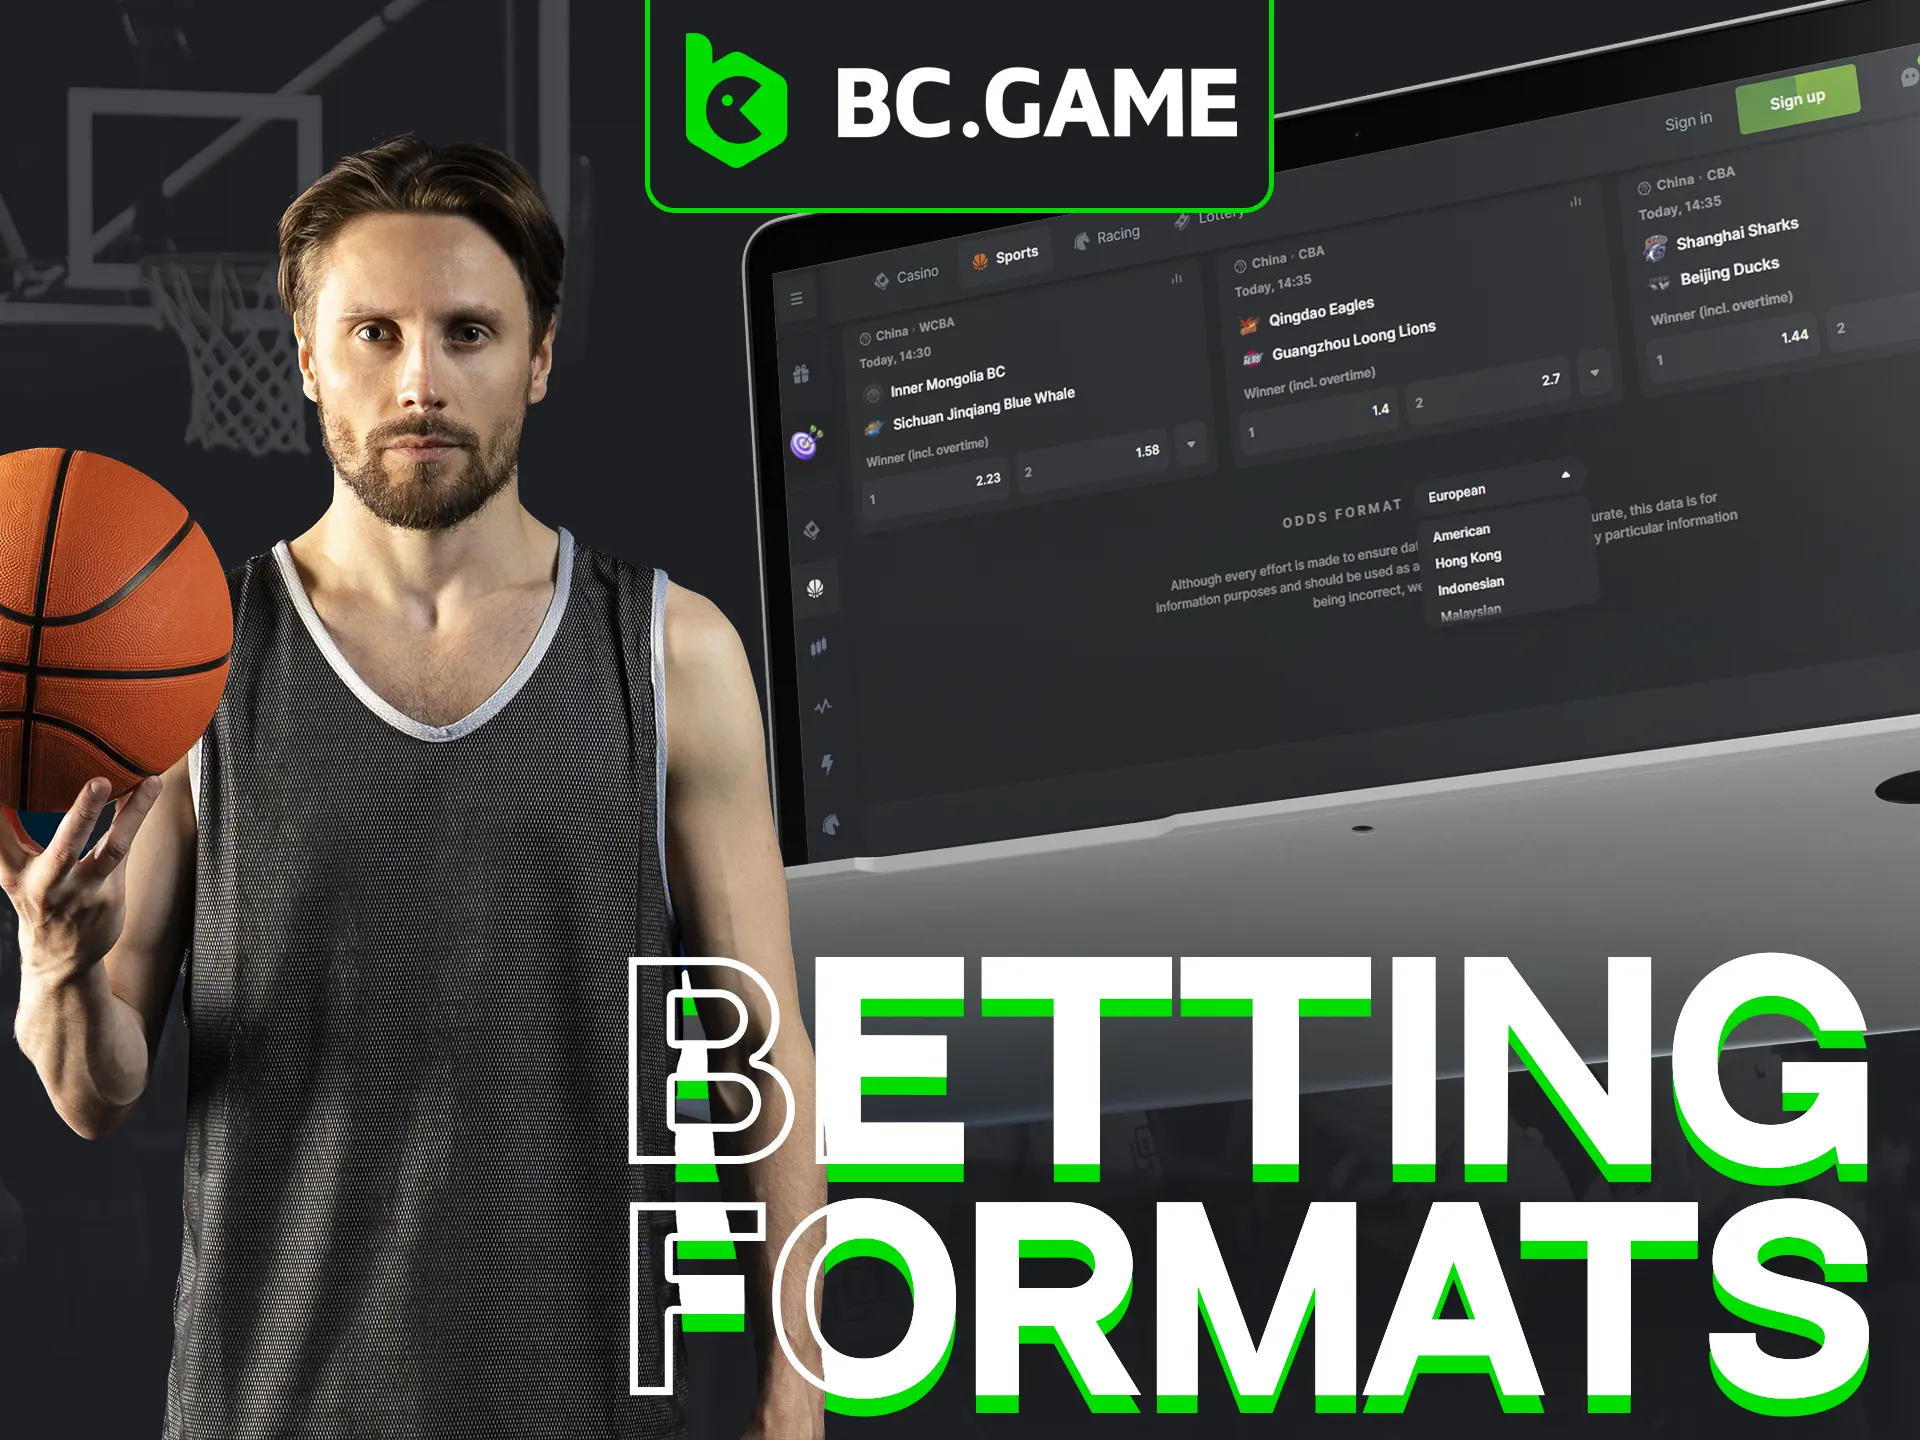 BC Game offers various basketball betting odds formats for convenience.